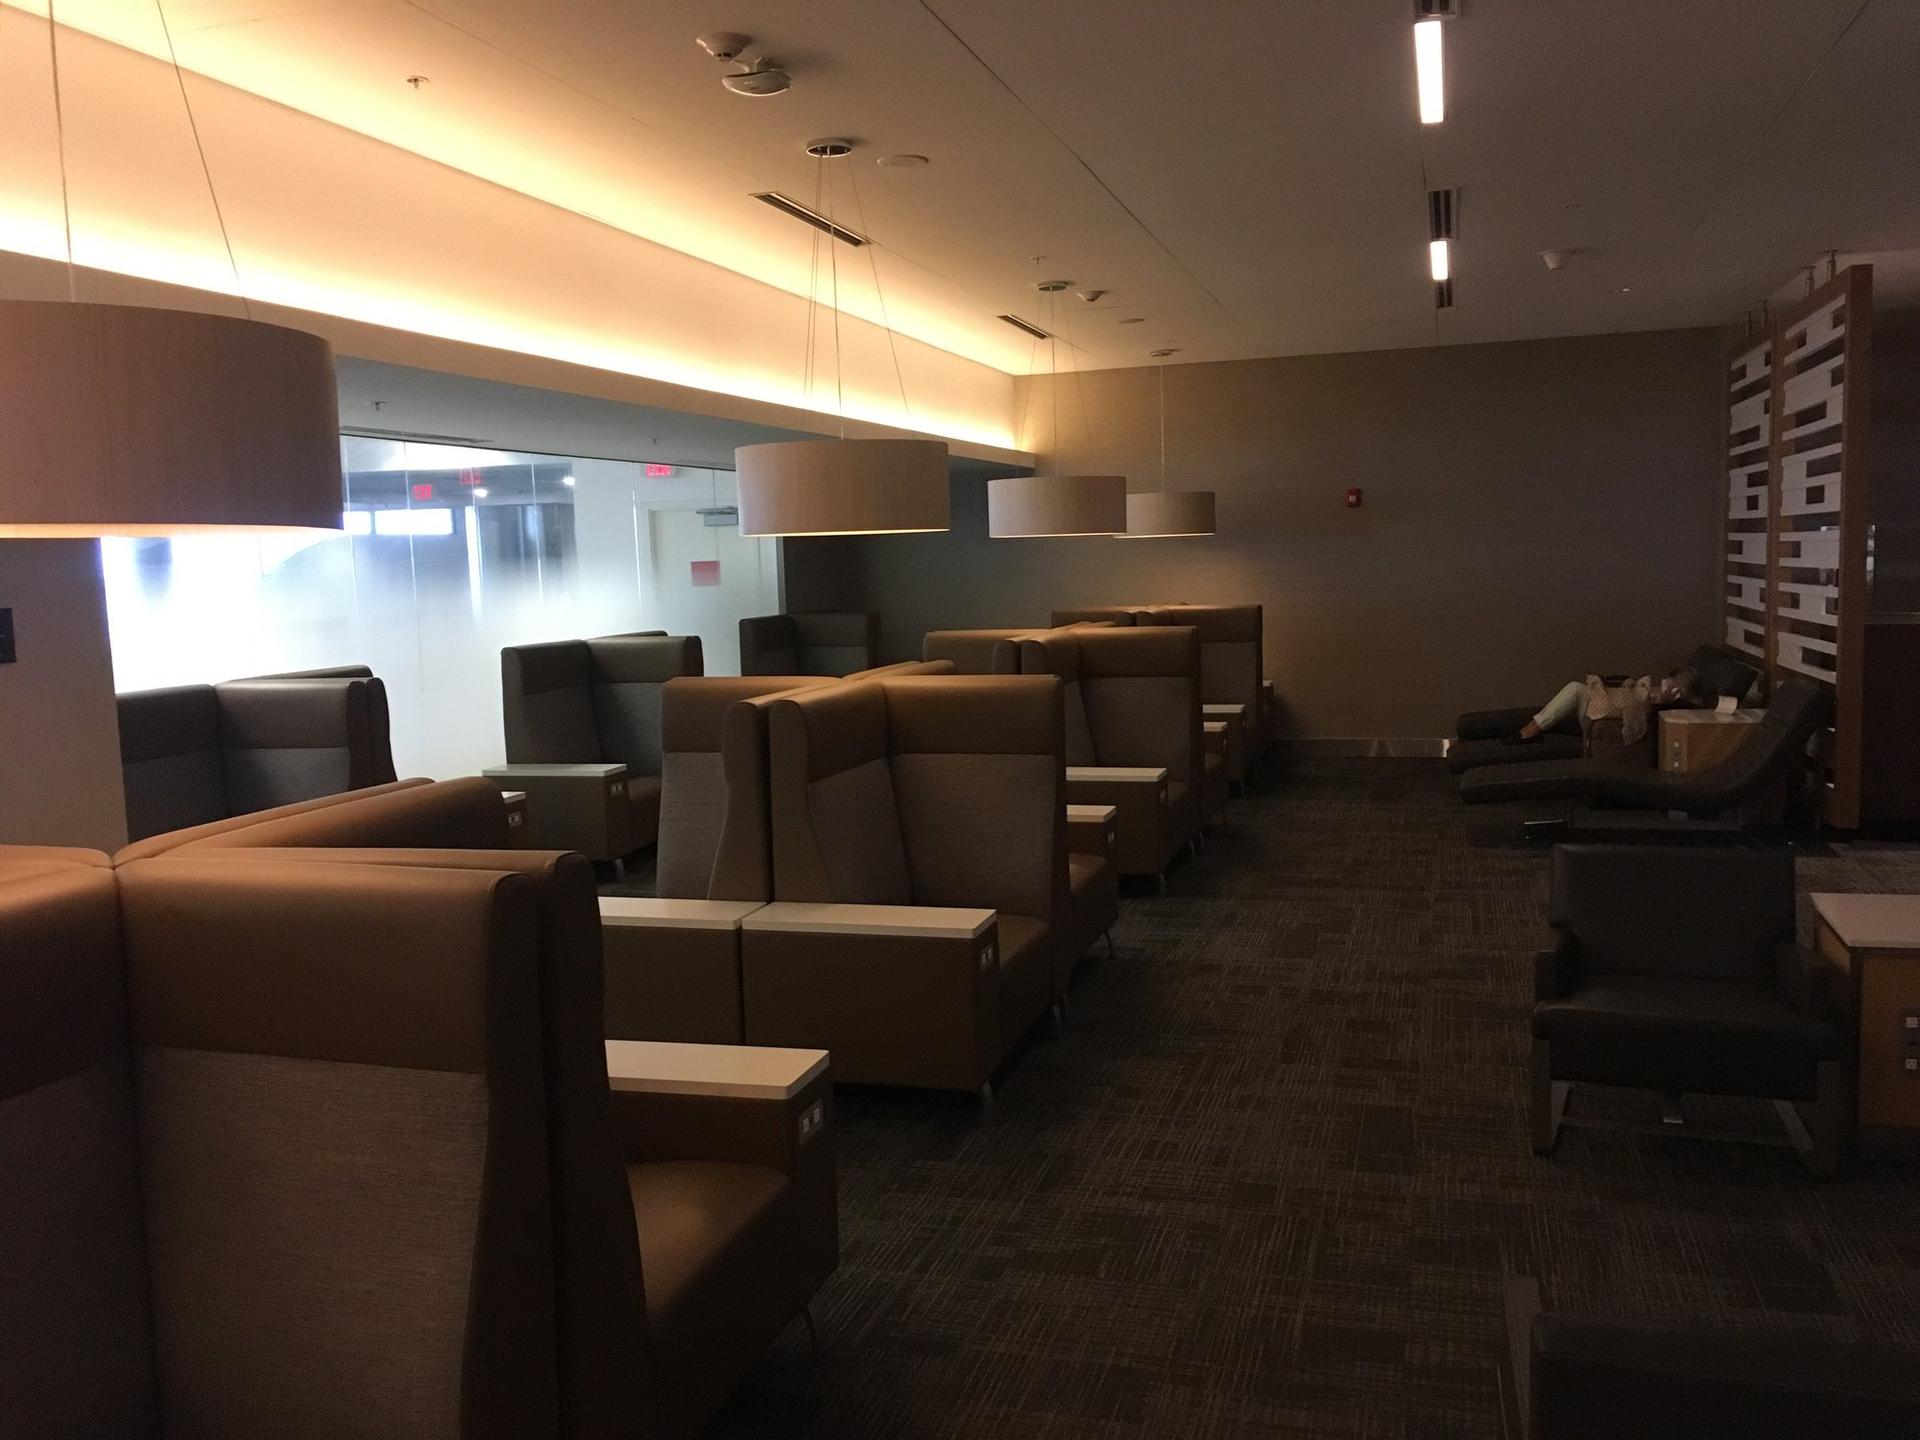 American Airlines Flagship Lounge image 27 of 65